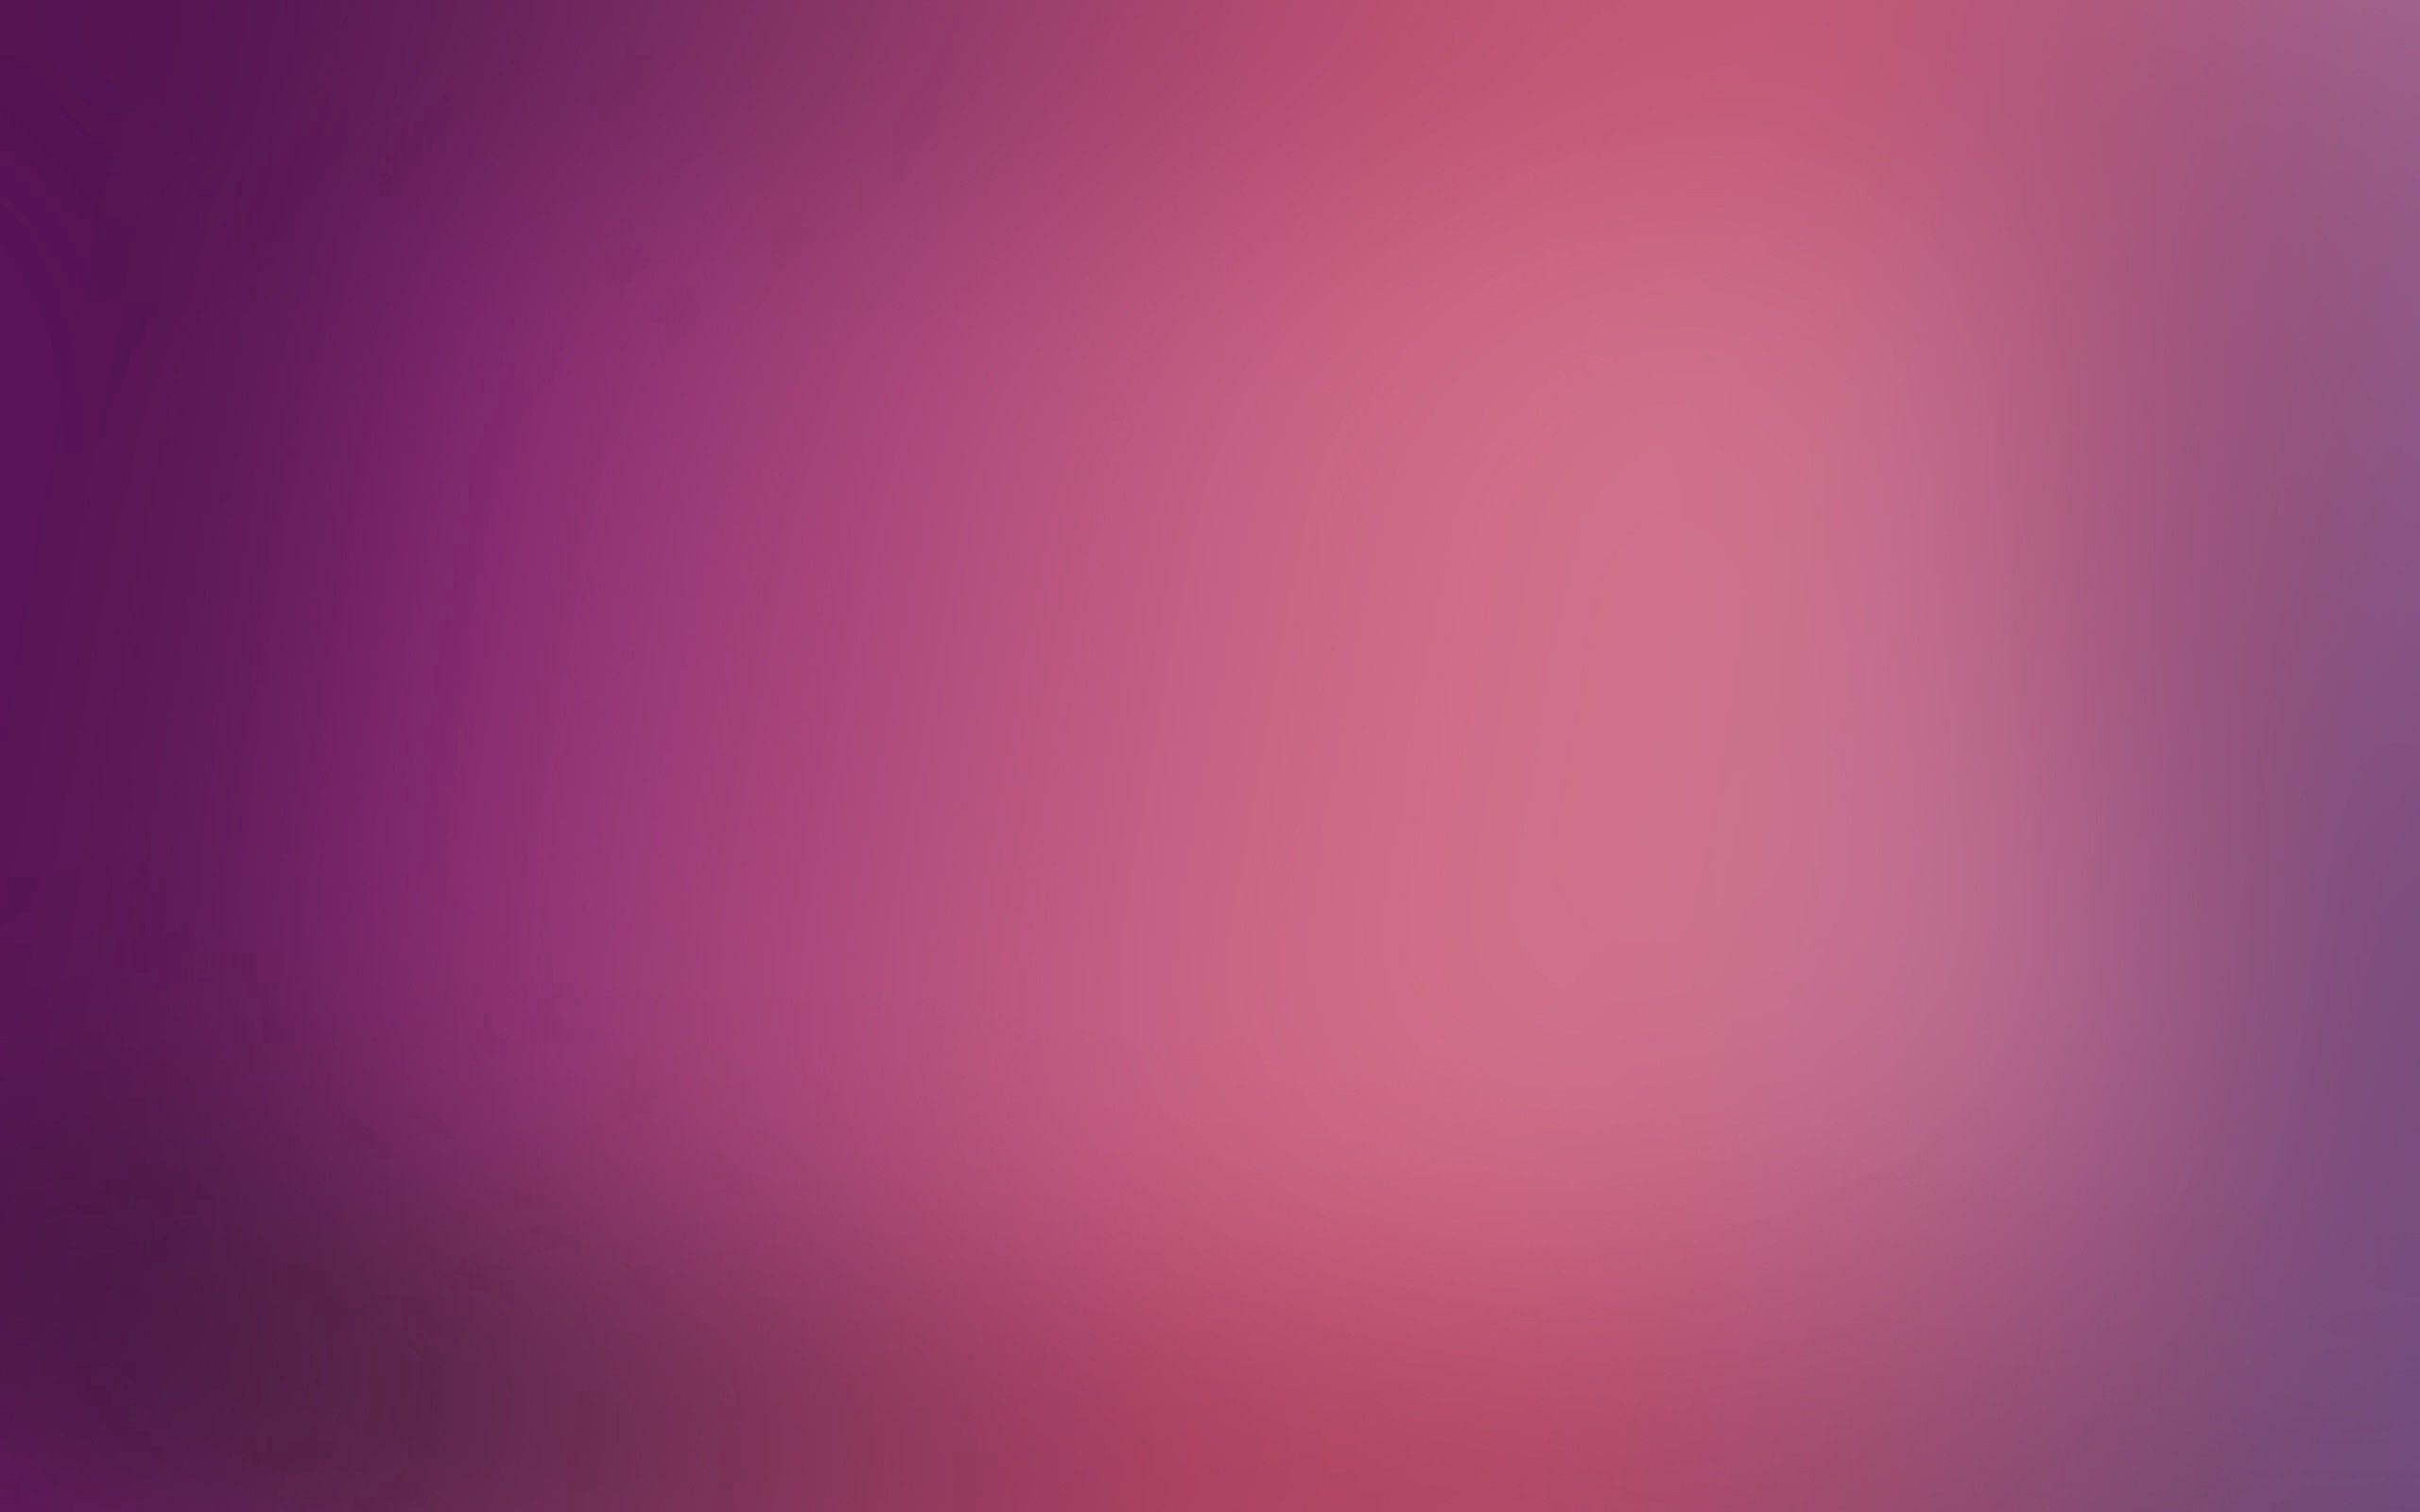 background, light coloured, abstract, light, bright, solid 1080p